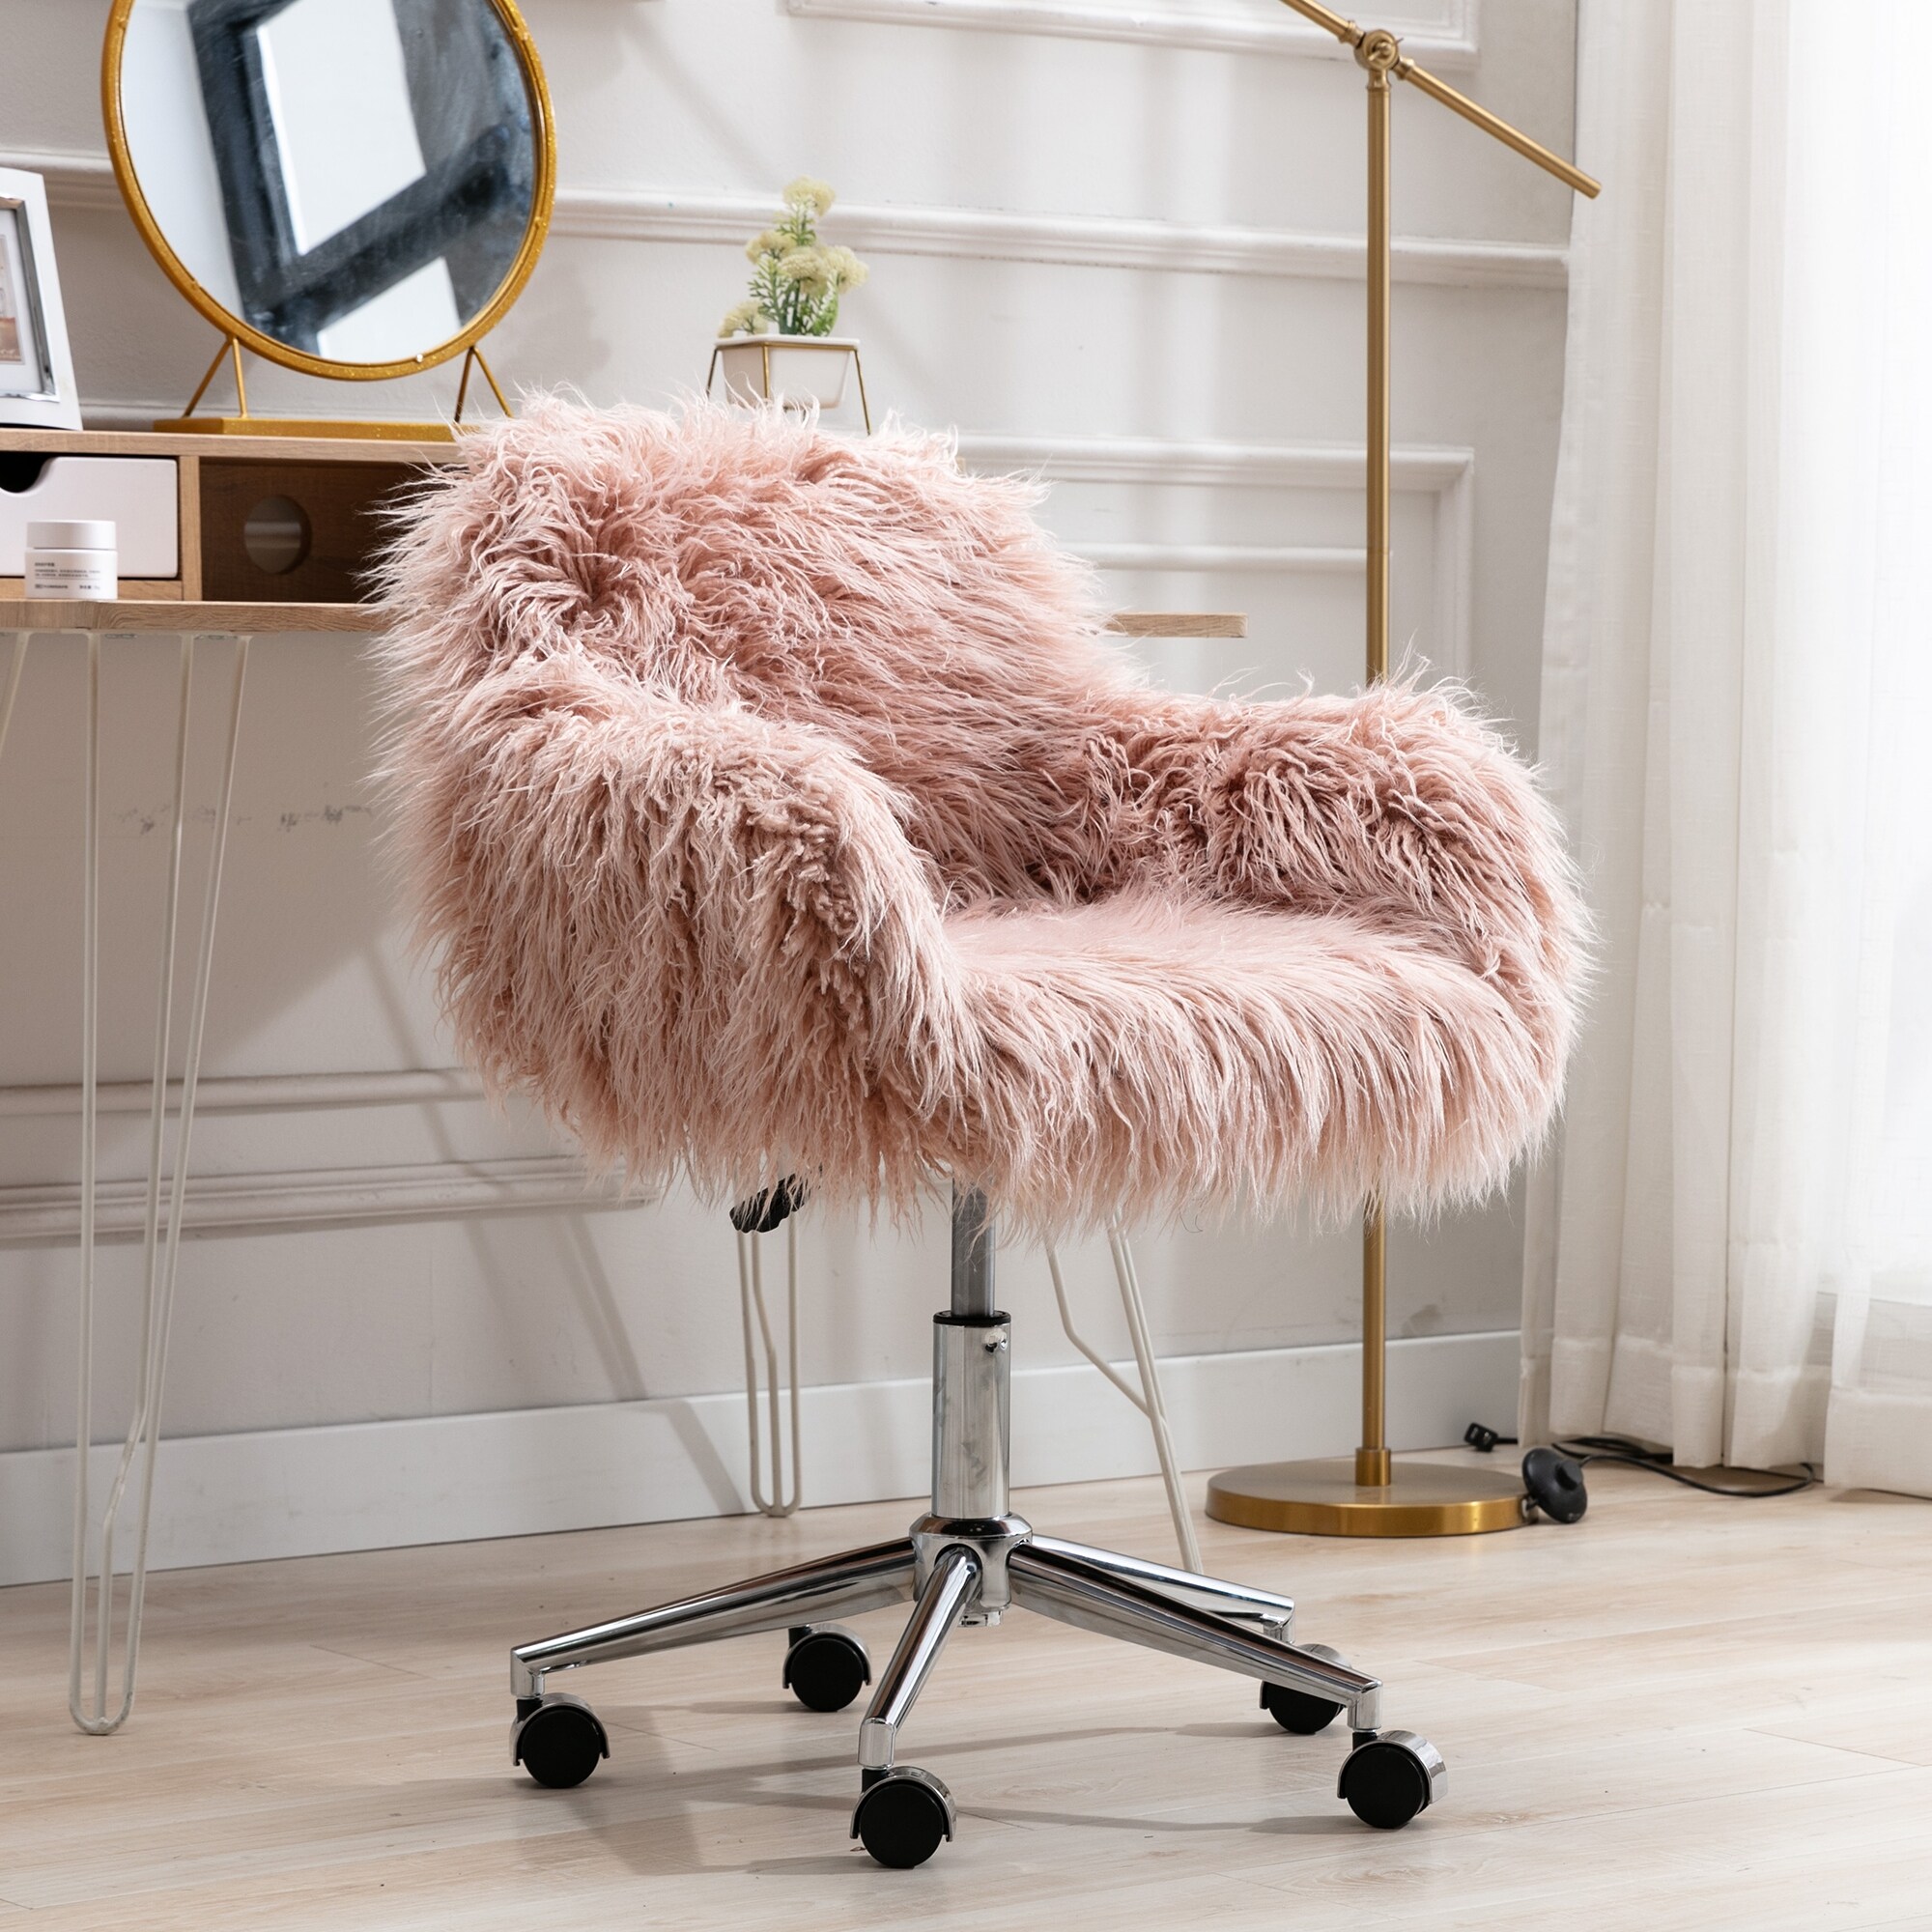 TiramisuBest Modern Faux Fur Home Office Chair, Makeup Vanity Fluffy Chair for Girls, Pink